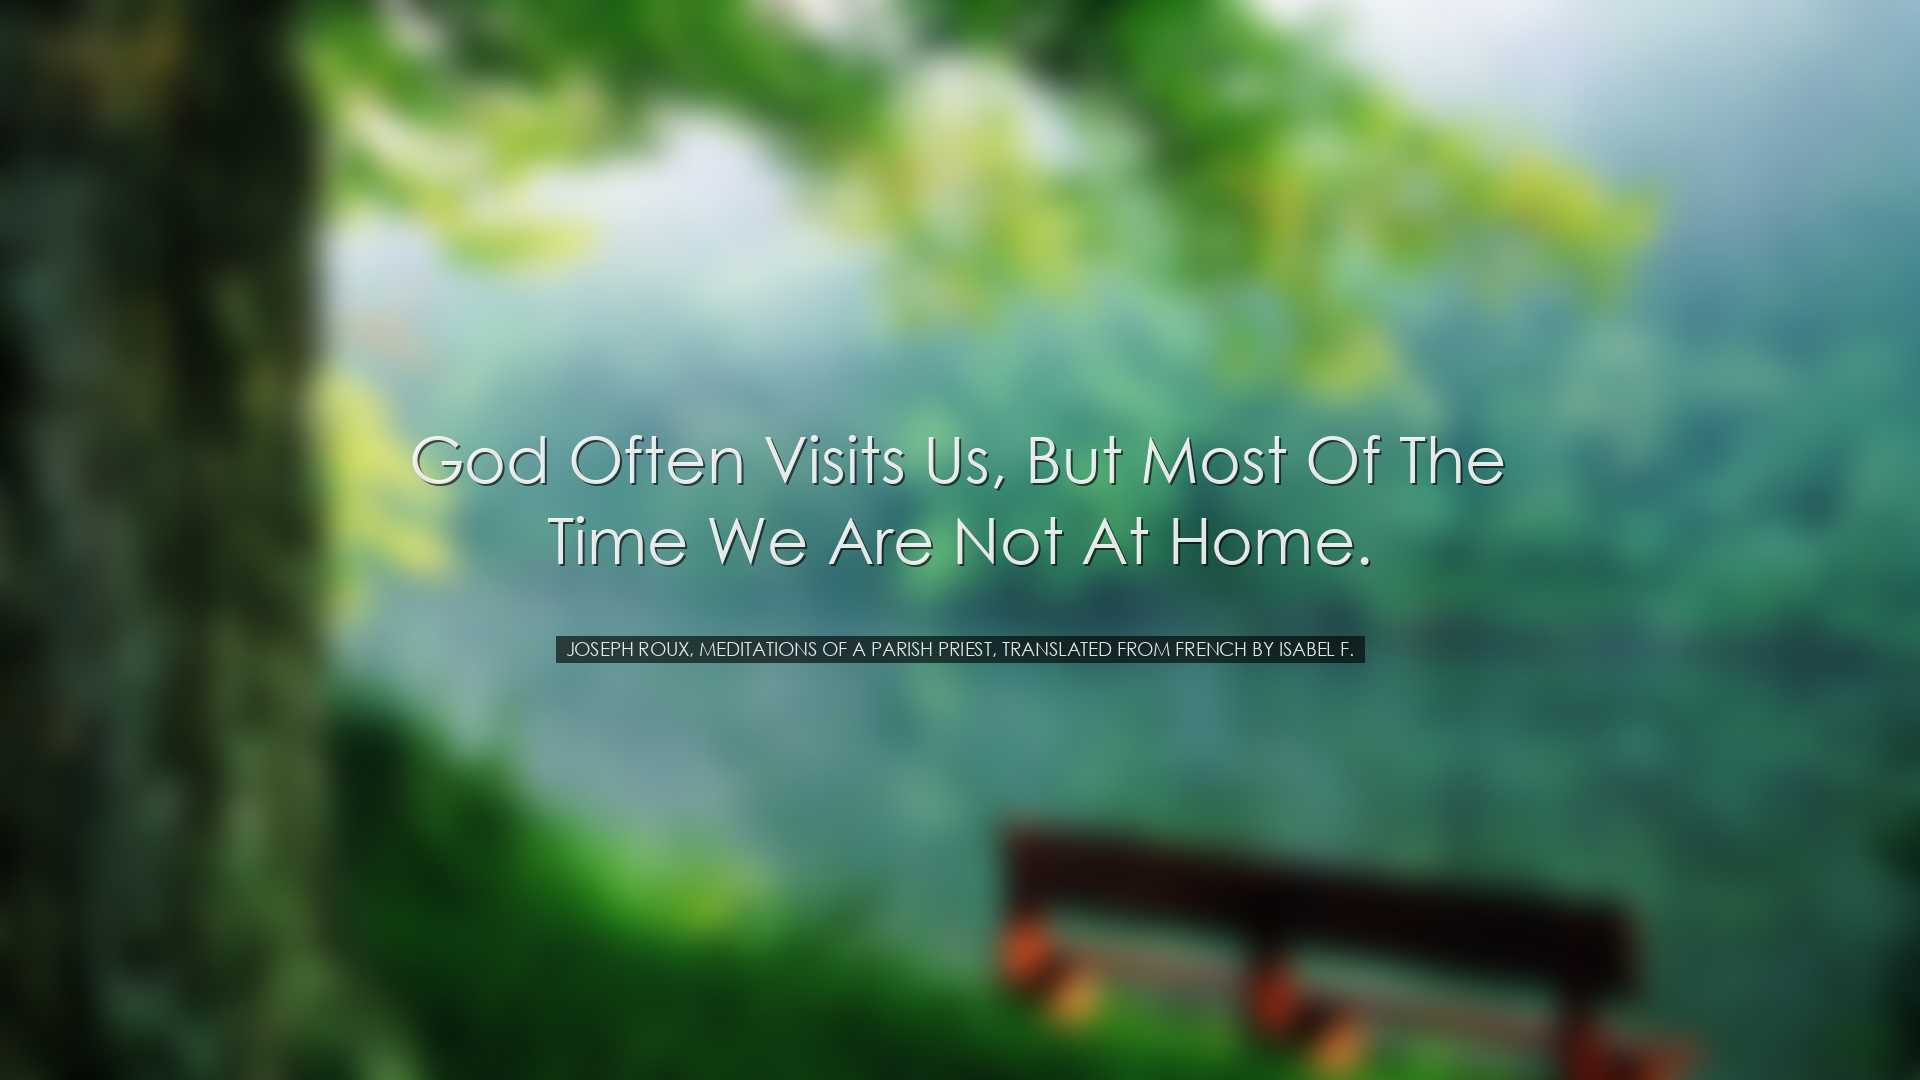 God often visits us, but most of the time we are not at home. - Jo